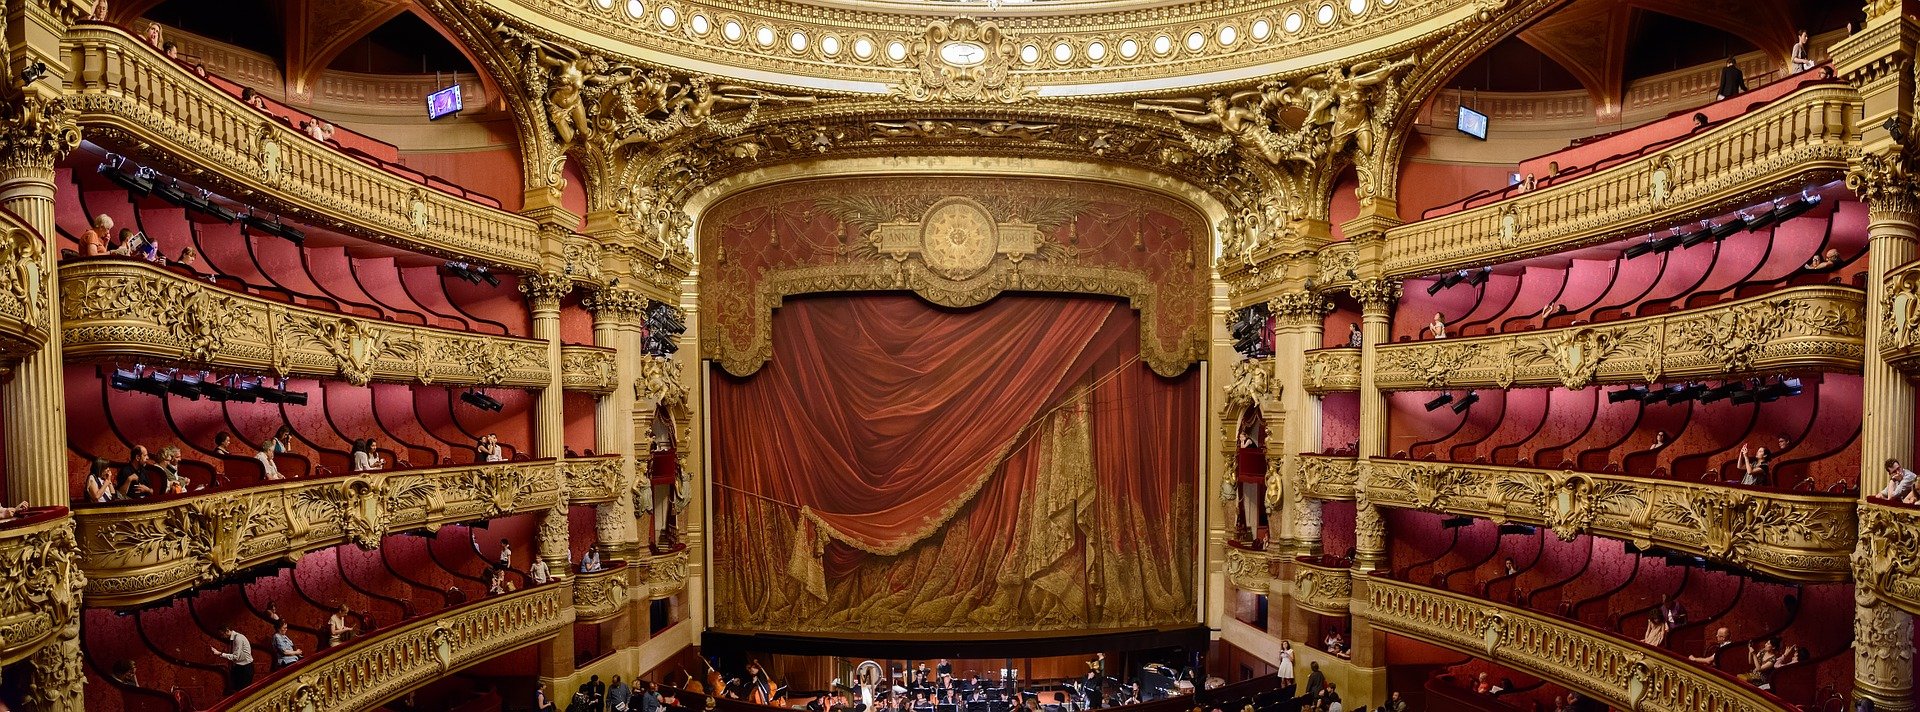 this shows a beautiful and elaborate theater with a heavy red curtain decorated with gold and 4 levels of box seats